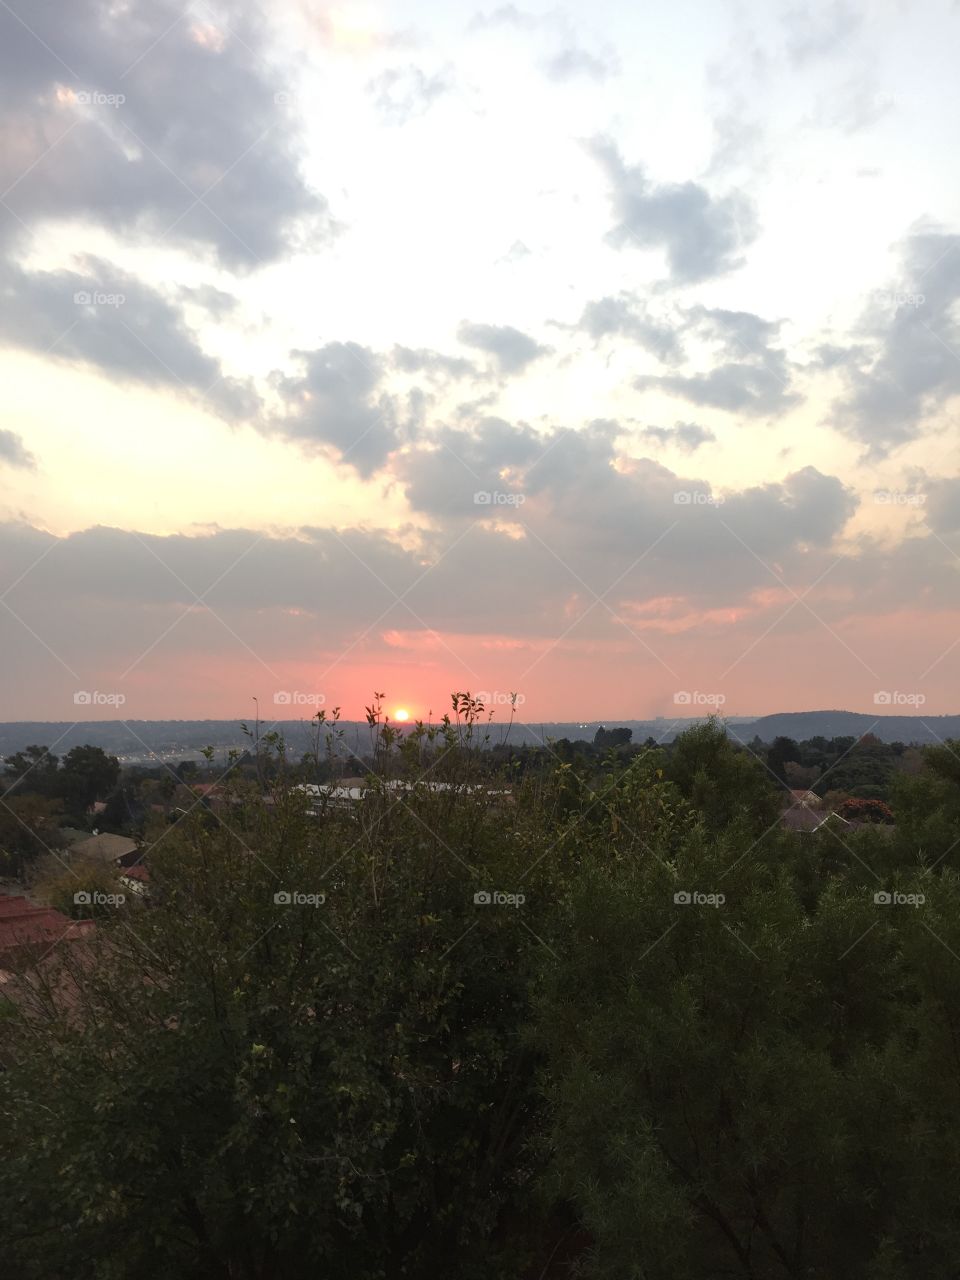 Beautiful sunset in South Africa Johannesburg 🇿🇦